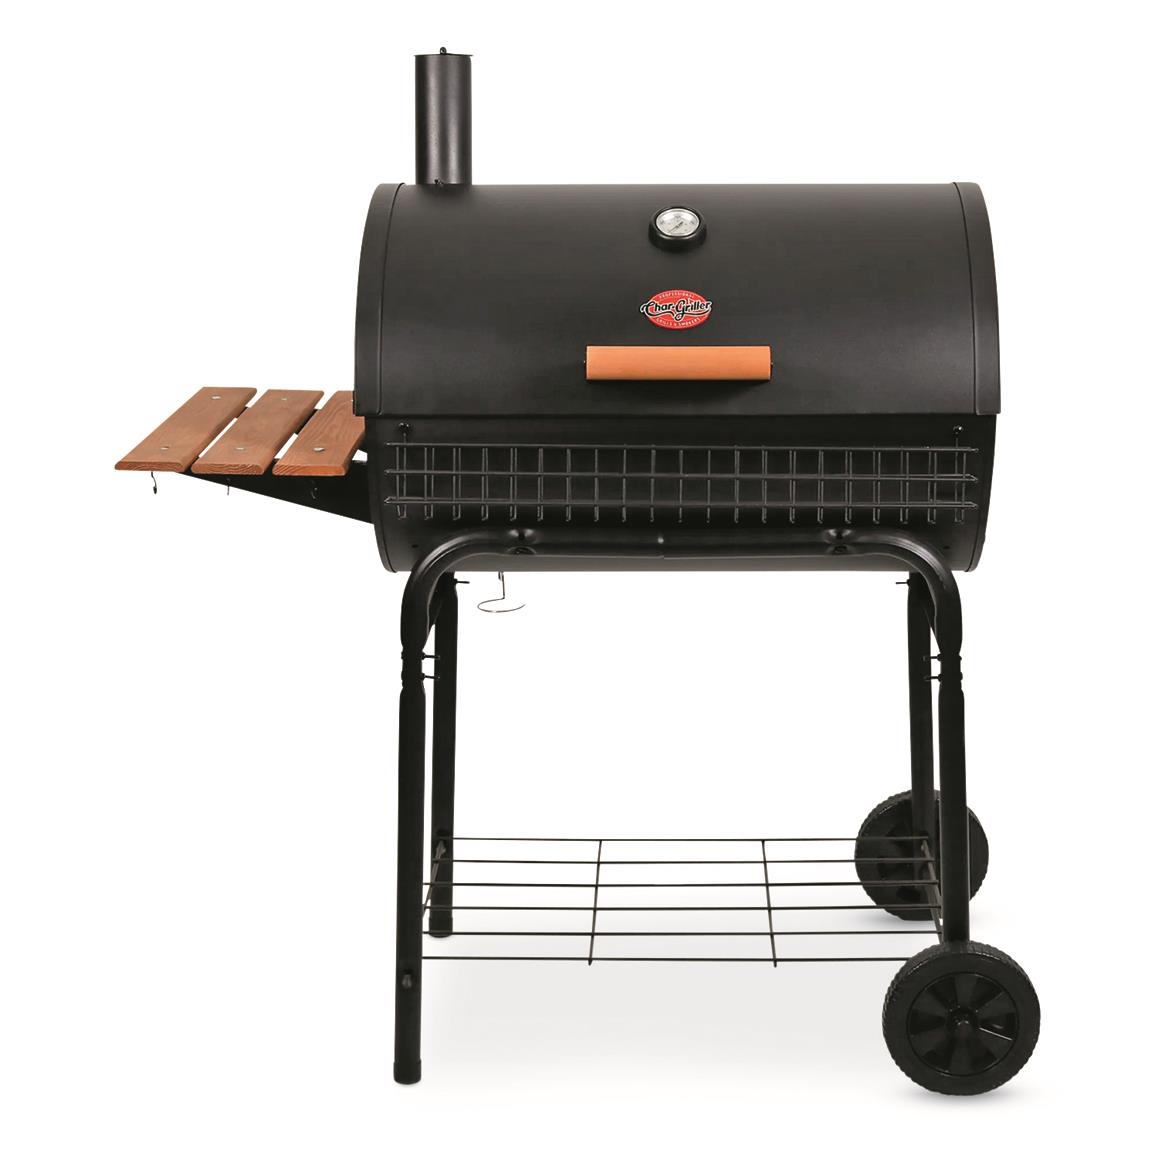 Char-Griller Deluxe Griller Charcoal Grill, Black